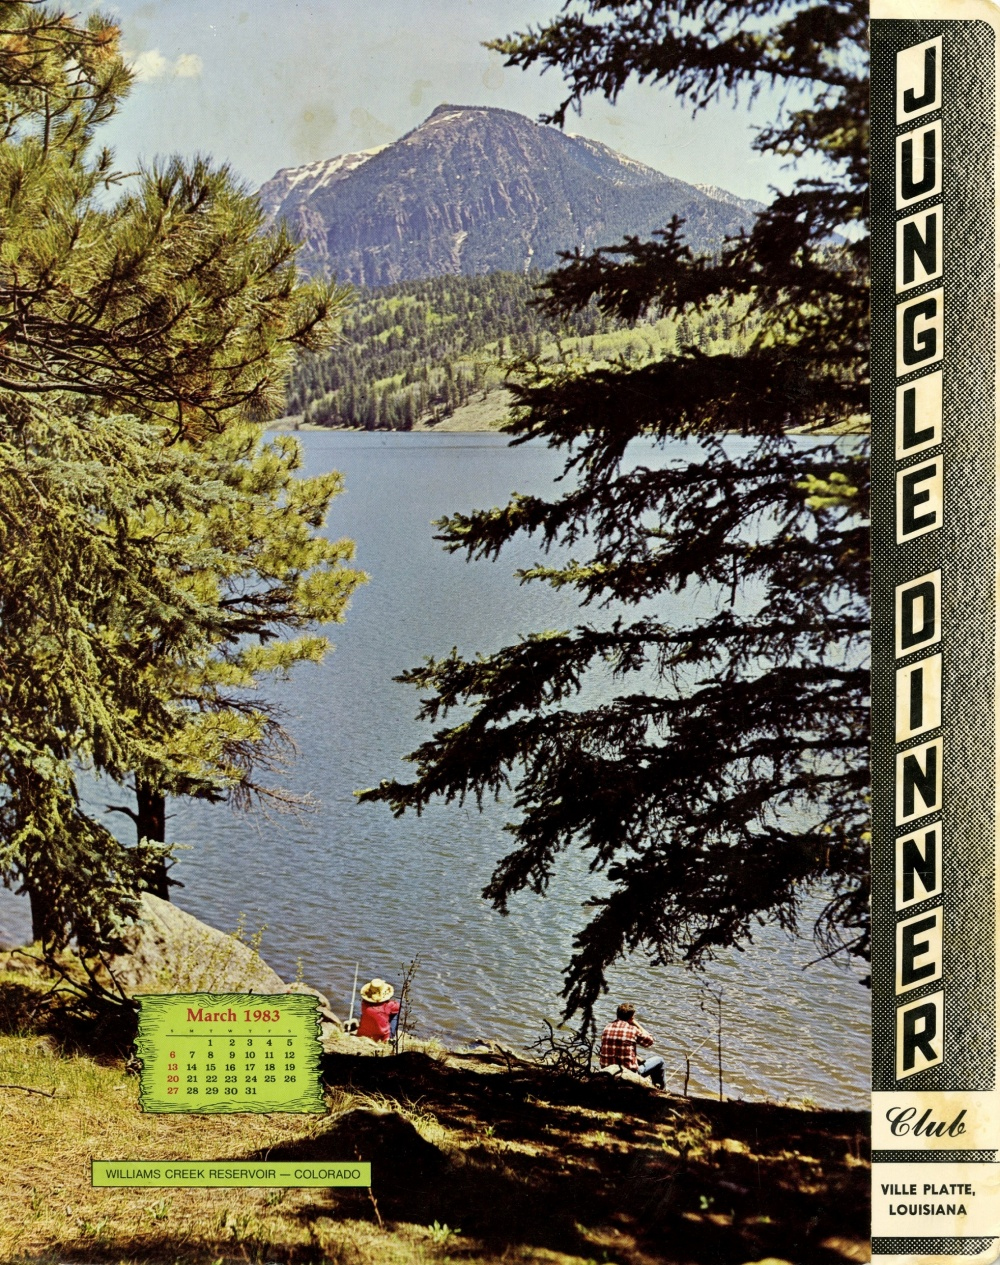 Menu image with trees, water, and mountain scenery